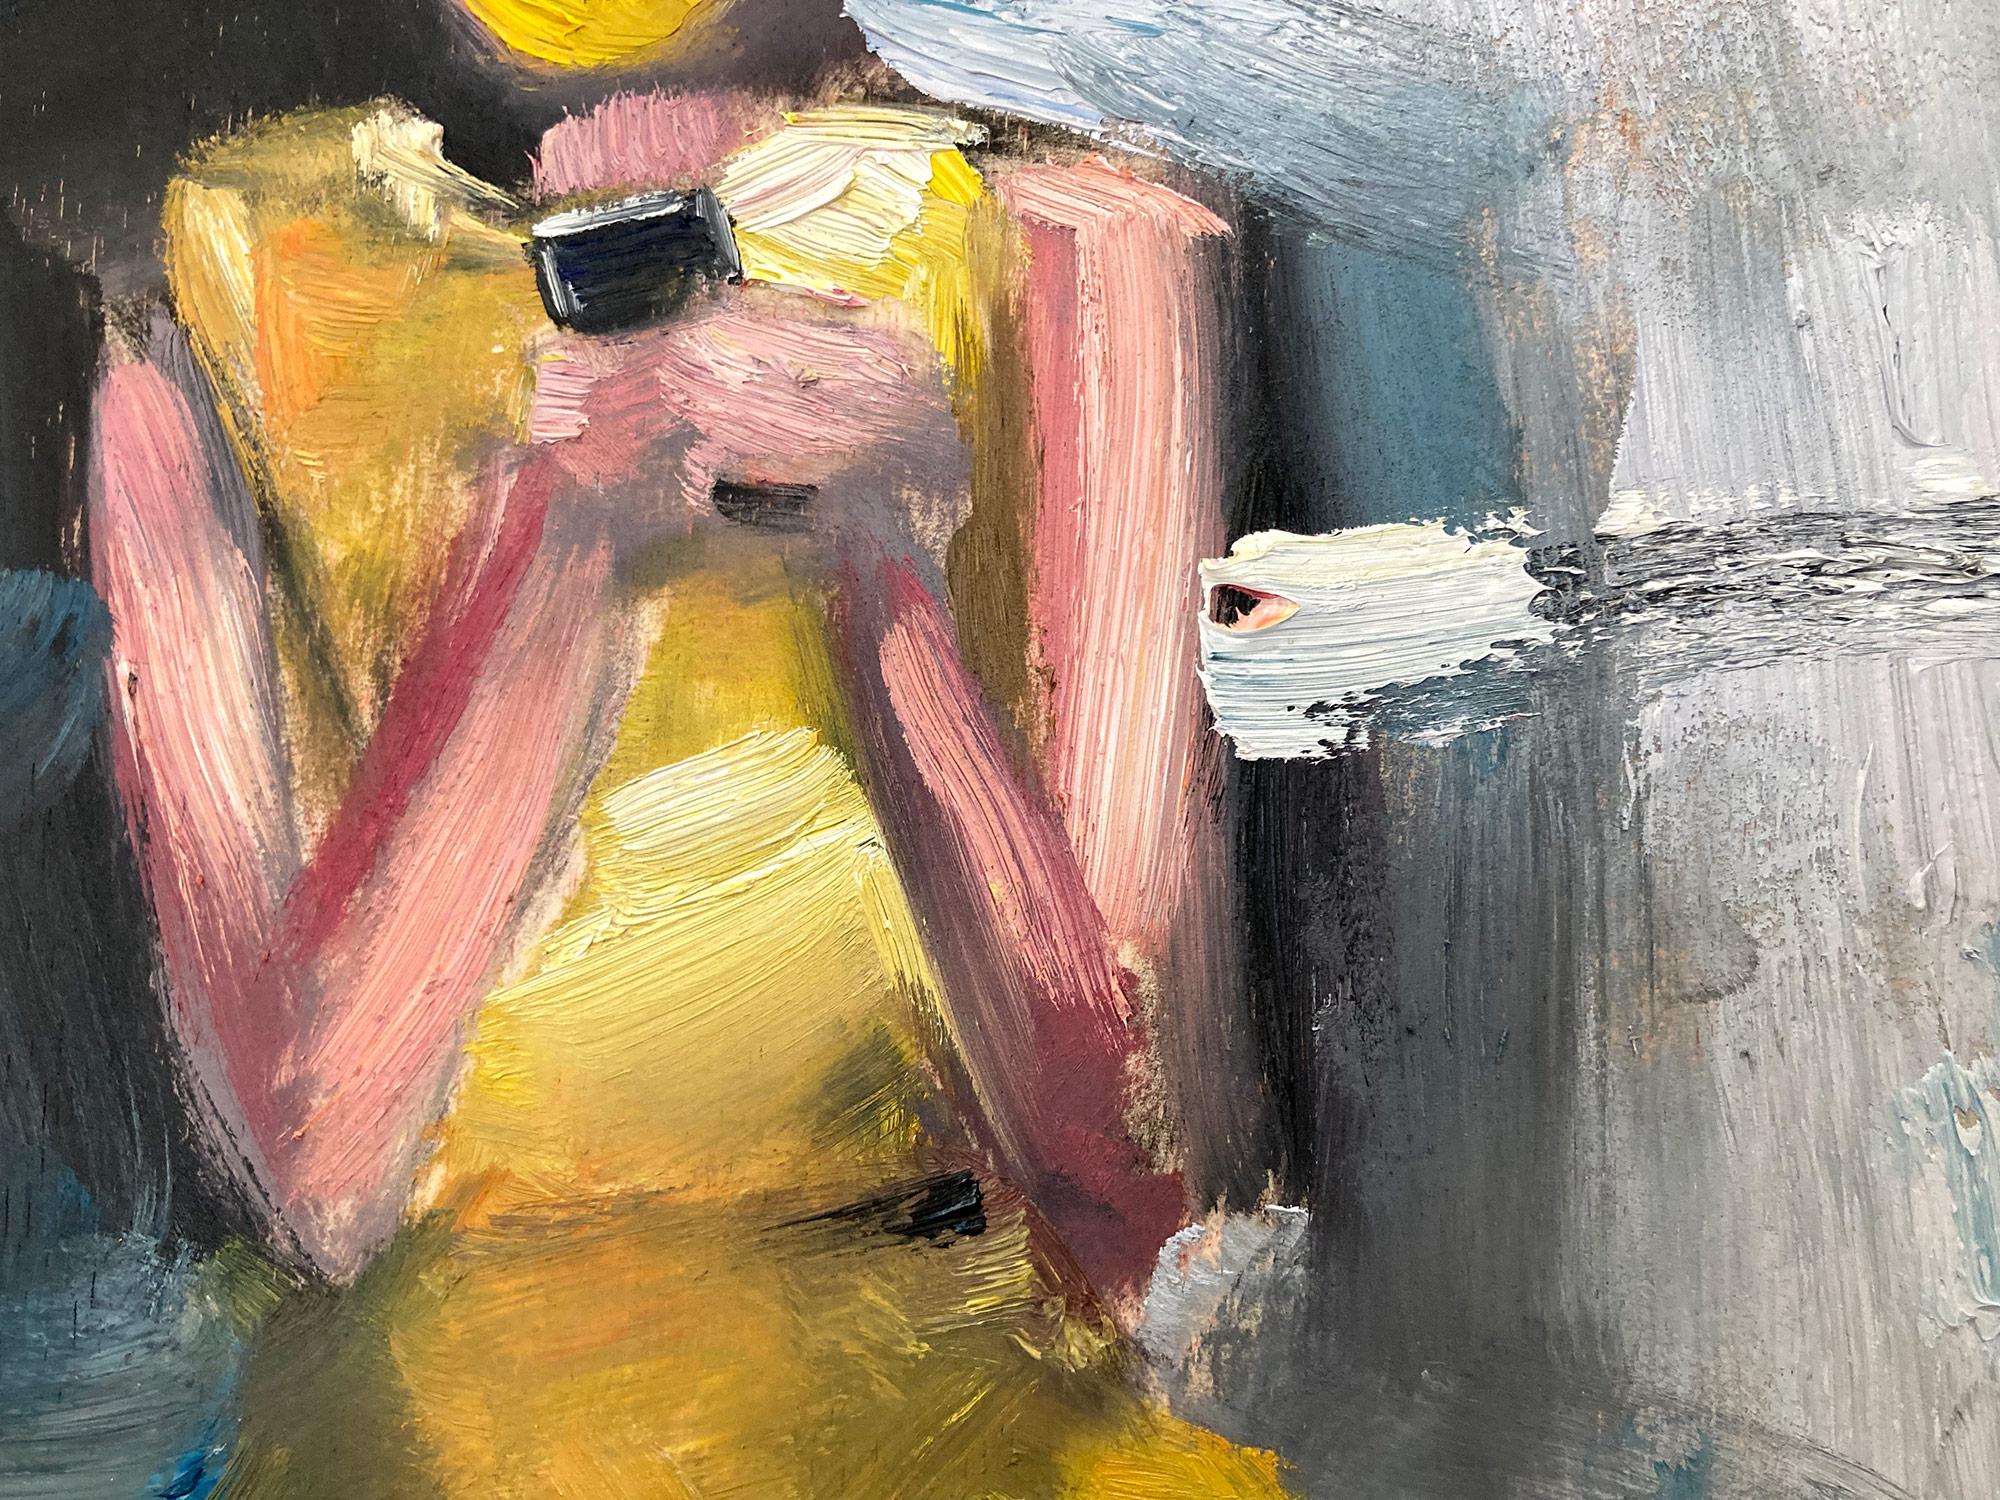 A very whimsical depiction of a woman blowing bubbles in a yellow dress texting on her phone. This piece captures the essence of fashion and Haute Couture effortlessly. Done in a very modern and impressionistic style, the colors are bright yet